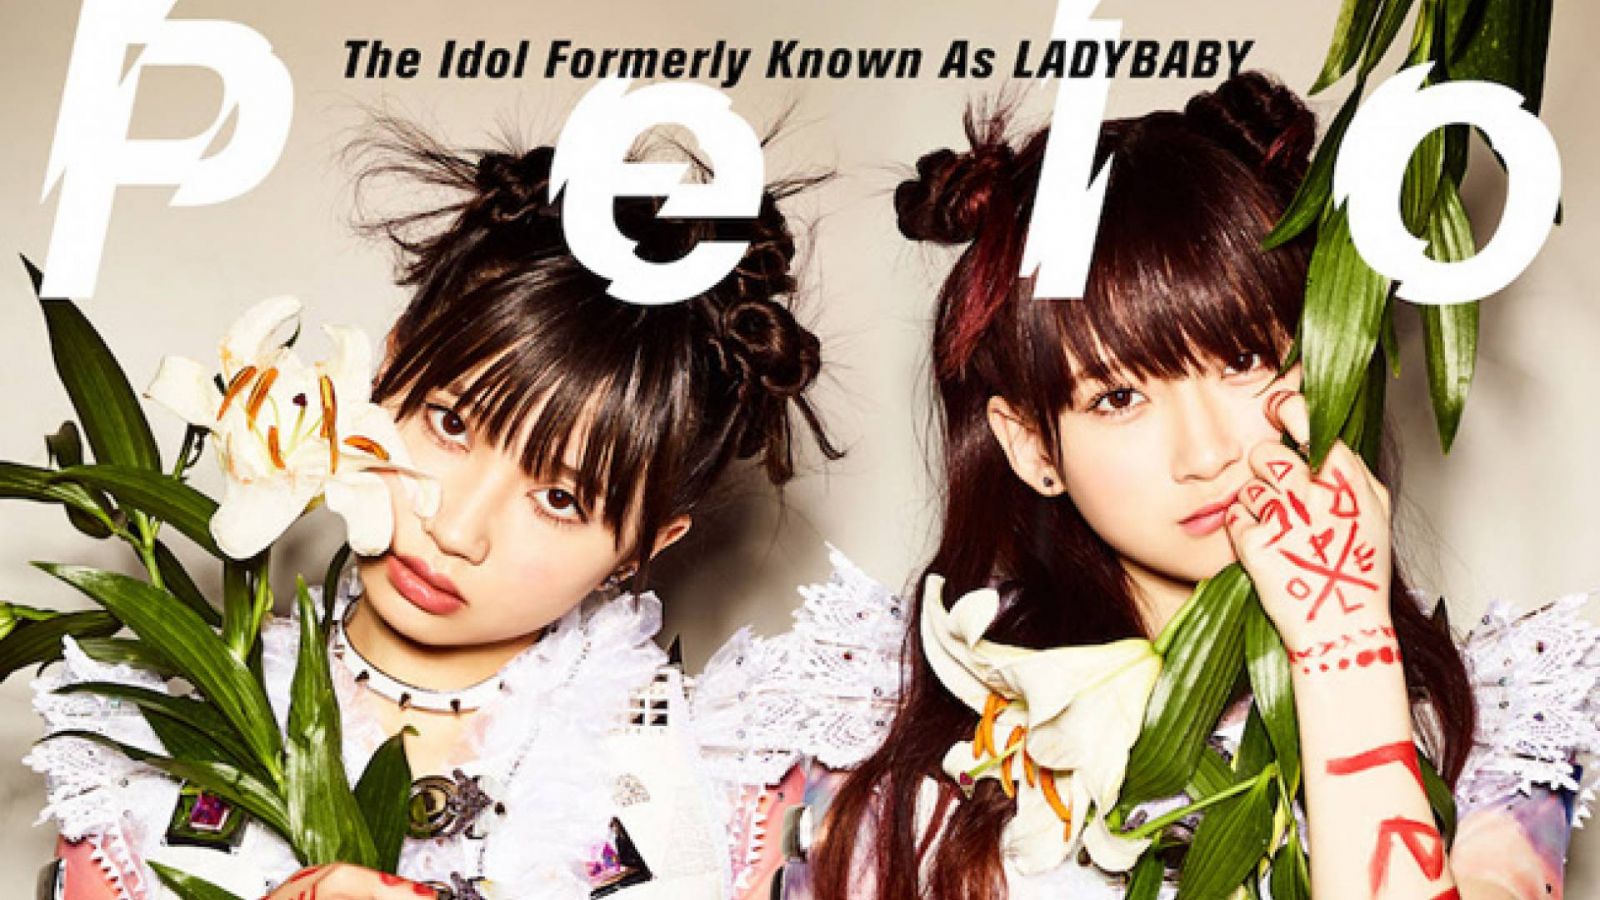 Neuigkeiten von The Idol Formerly Known As LADYBABY © LADYBABY PROJECT. All rights reserved.